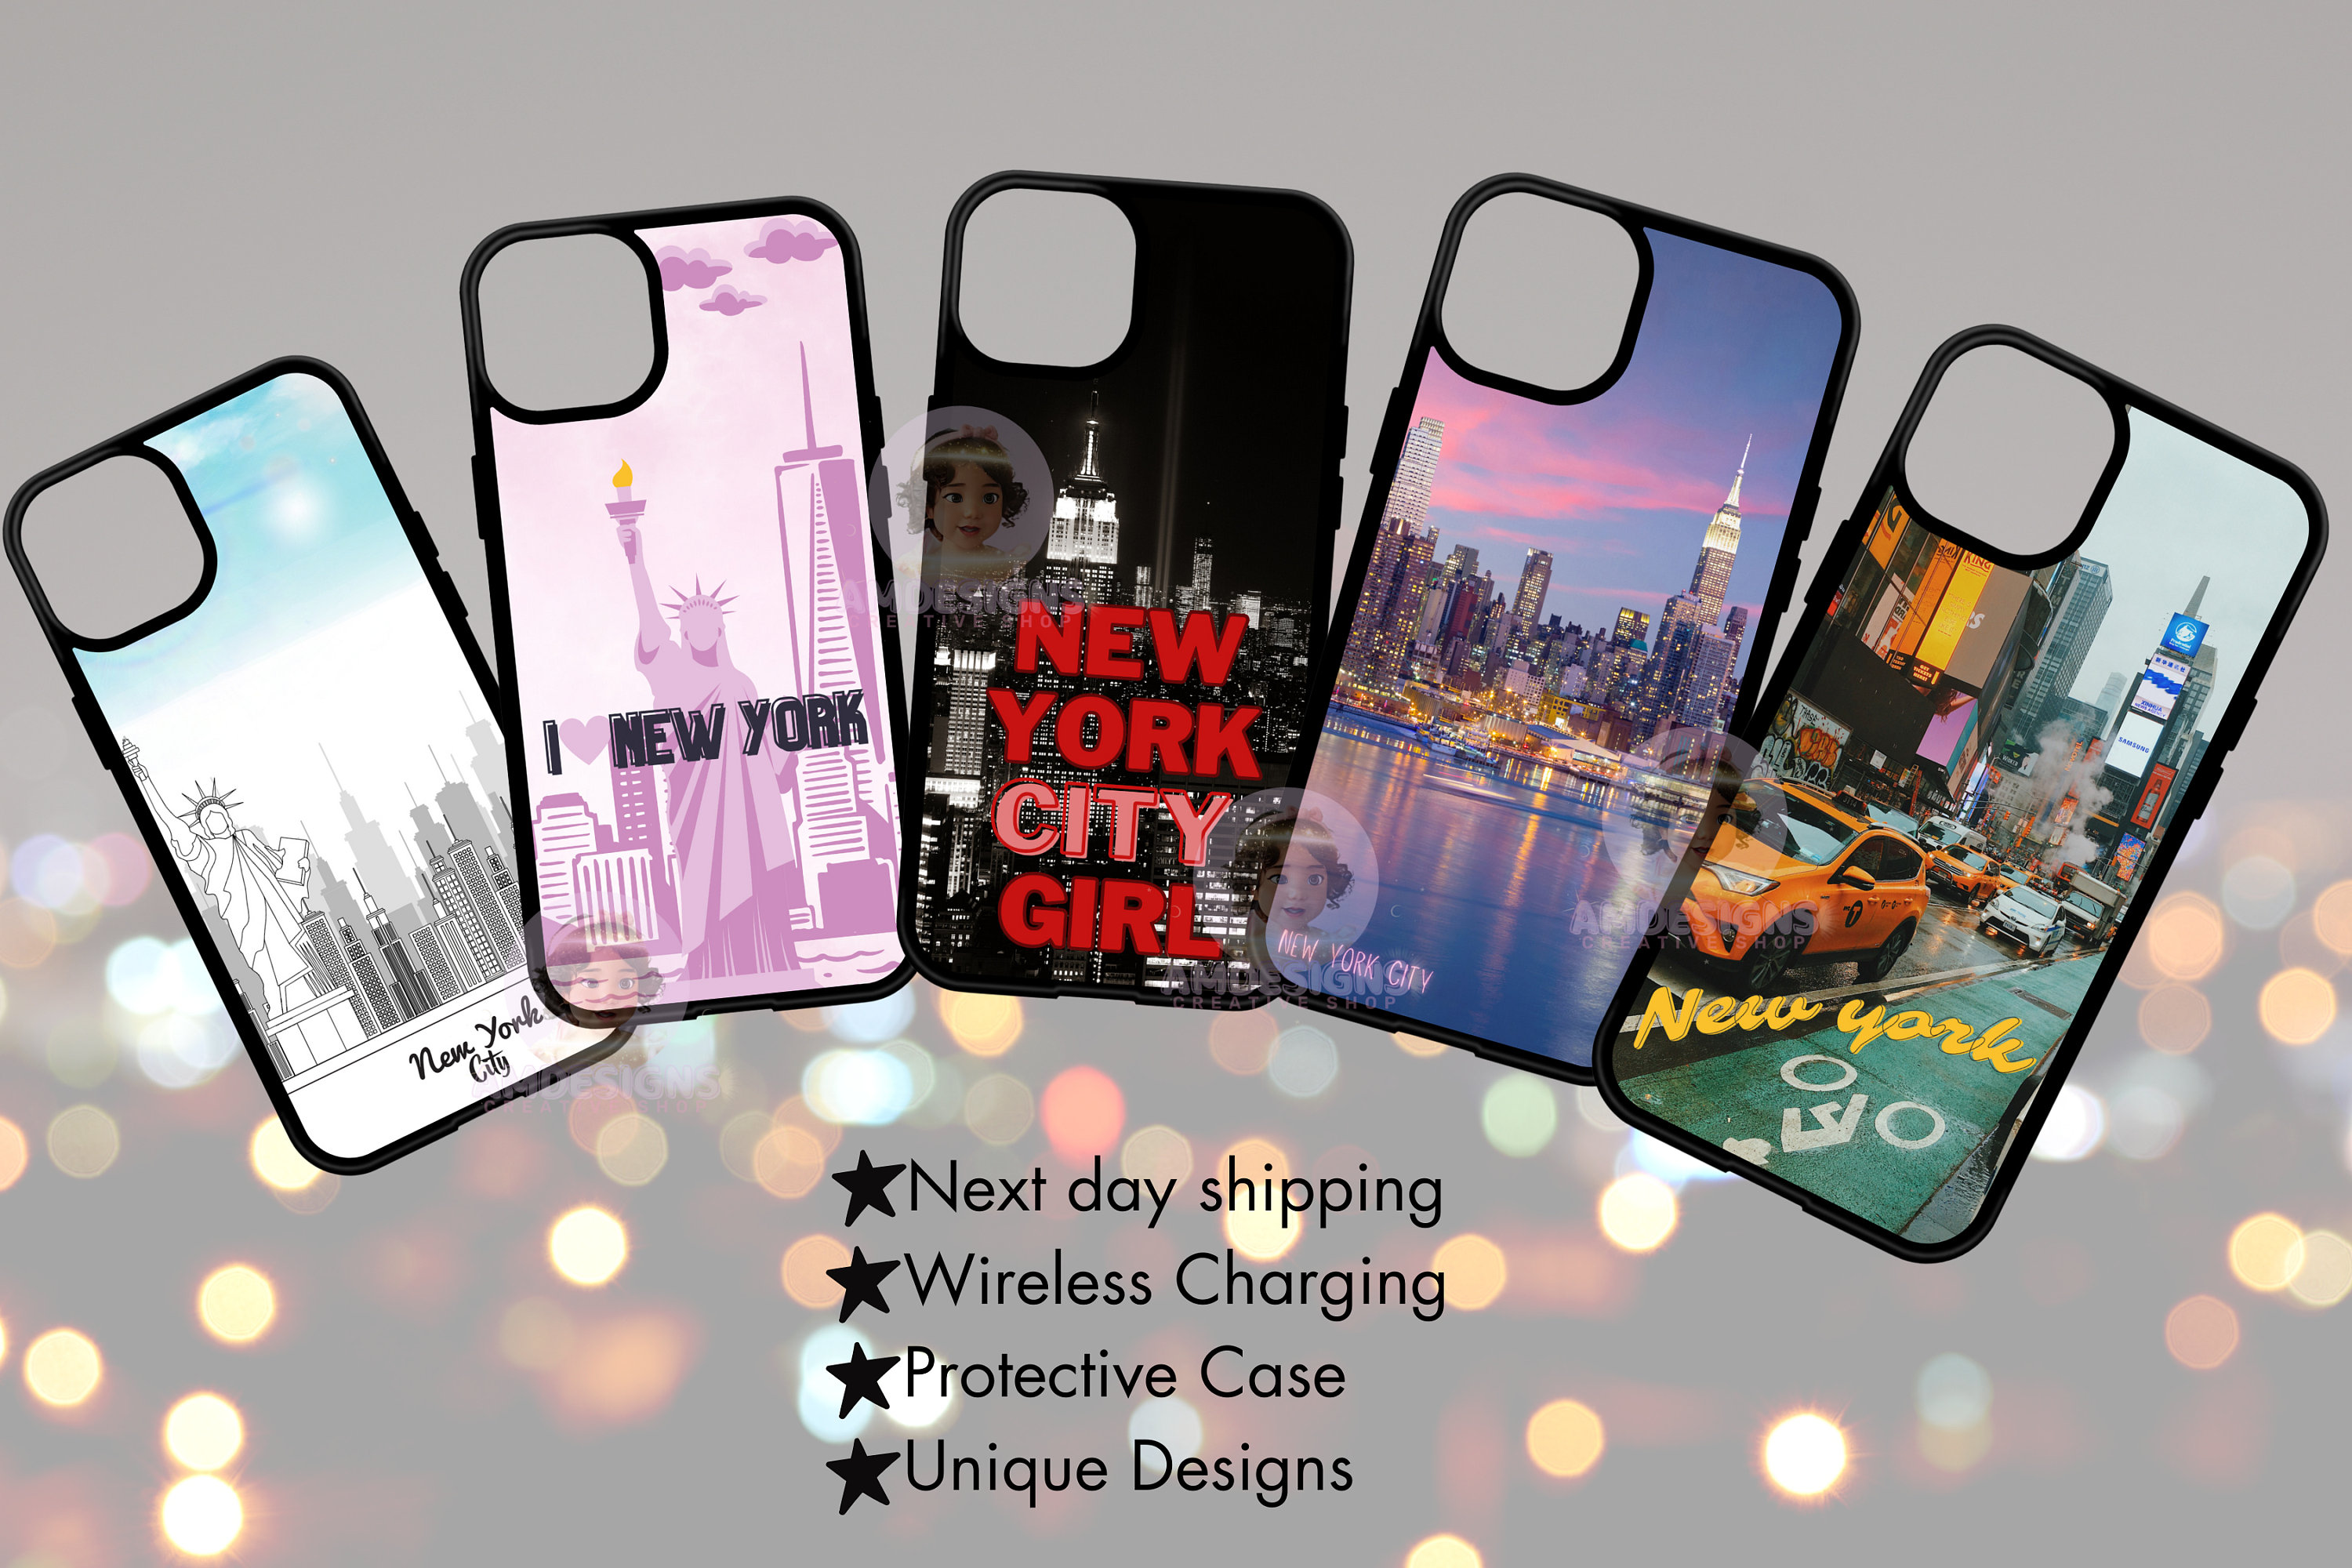 New york, New york iPhone Case by Serena